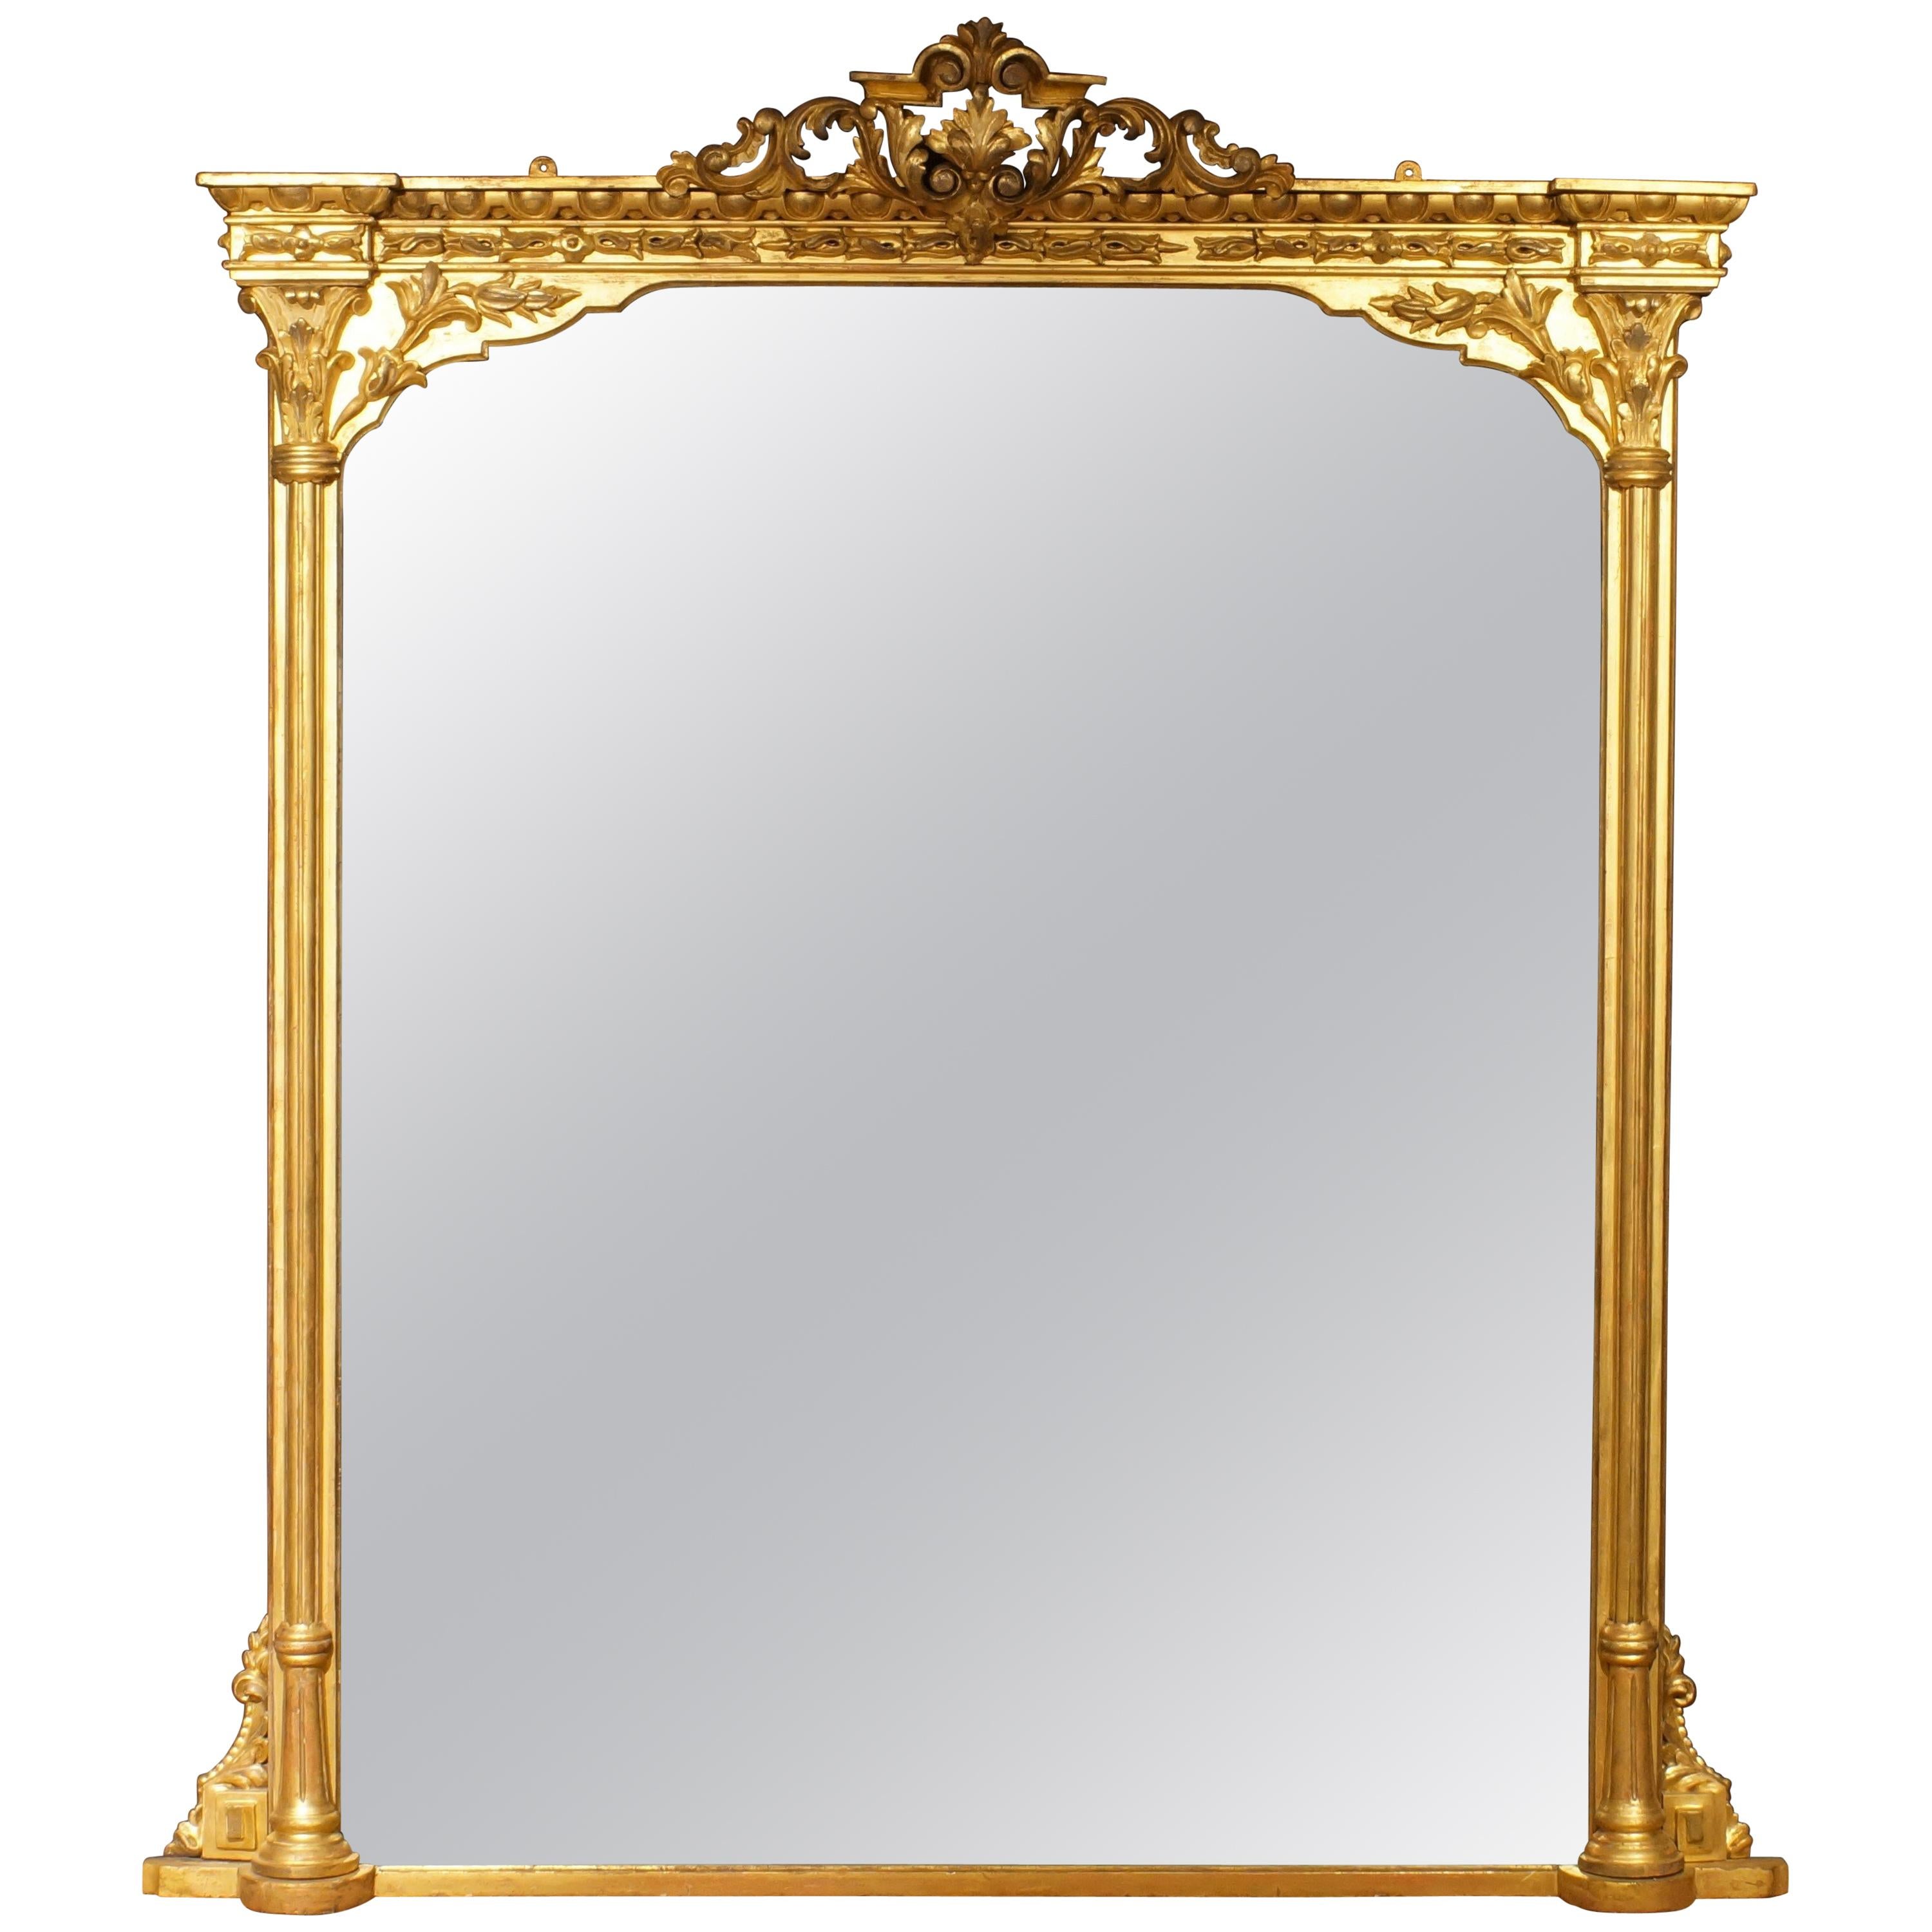 William IV Period Carved and Giltwood Square Top Overmantle Mirror of Large Size